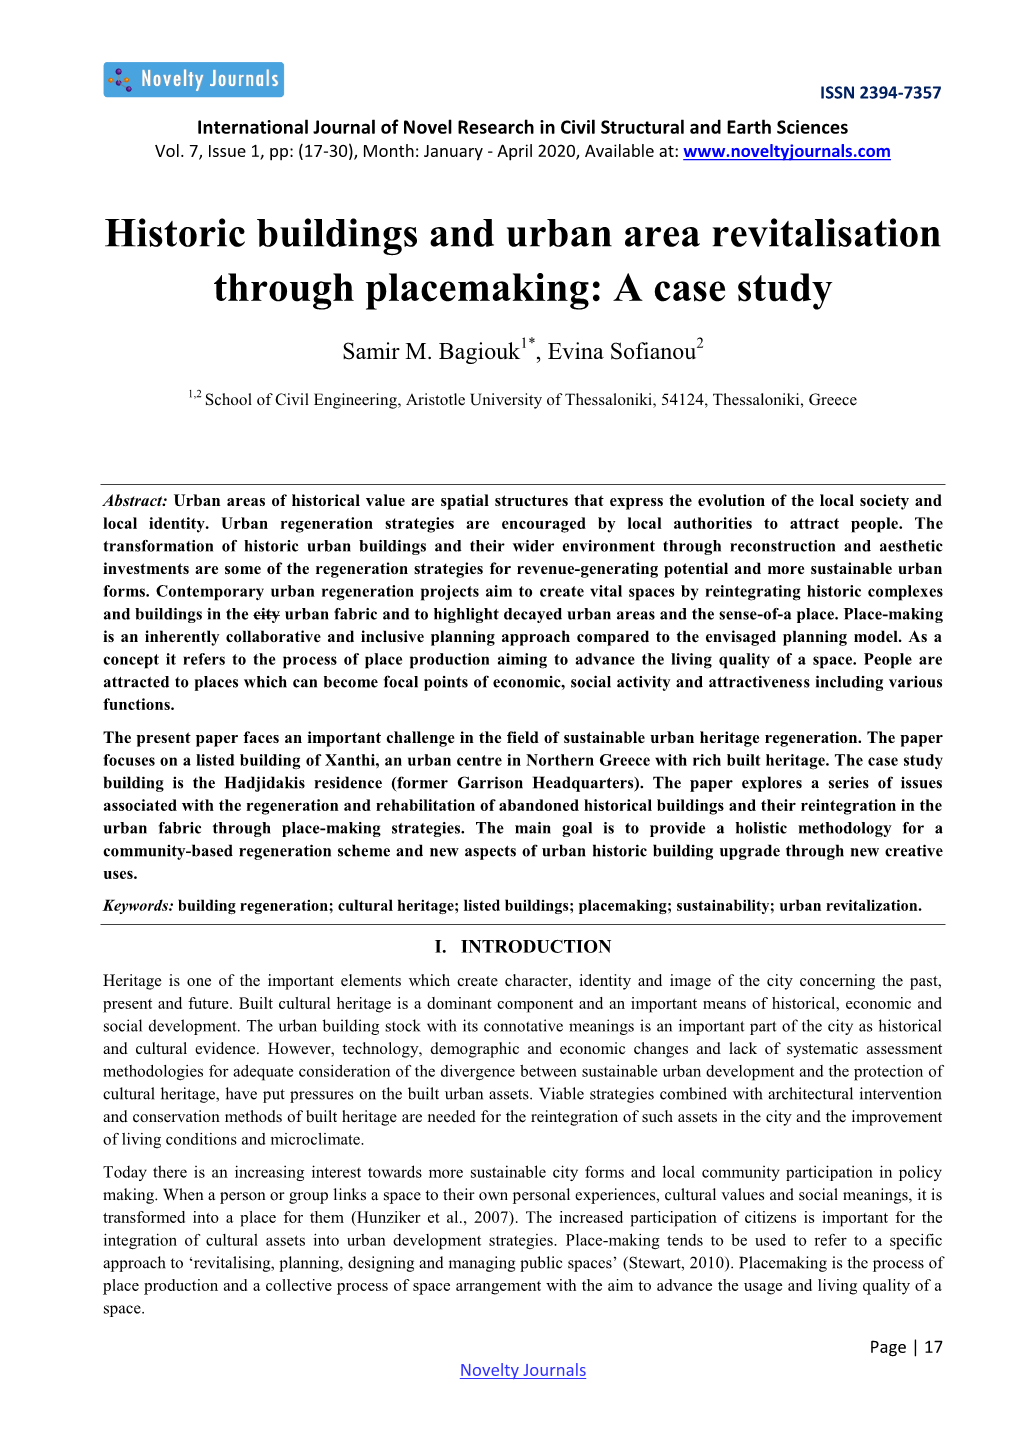 Historic Buildings and Urban Area Revitalisation Through Placemaking: a Case Study